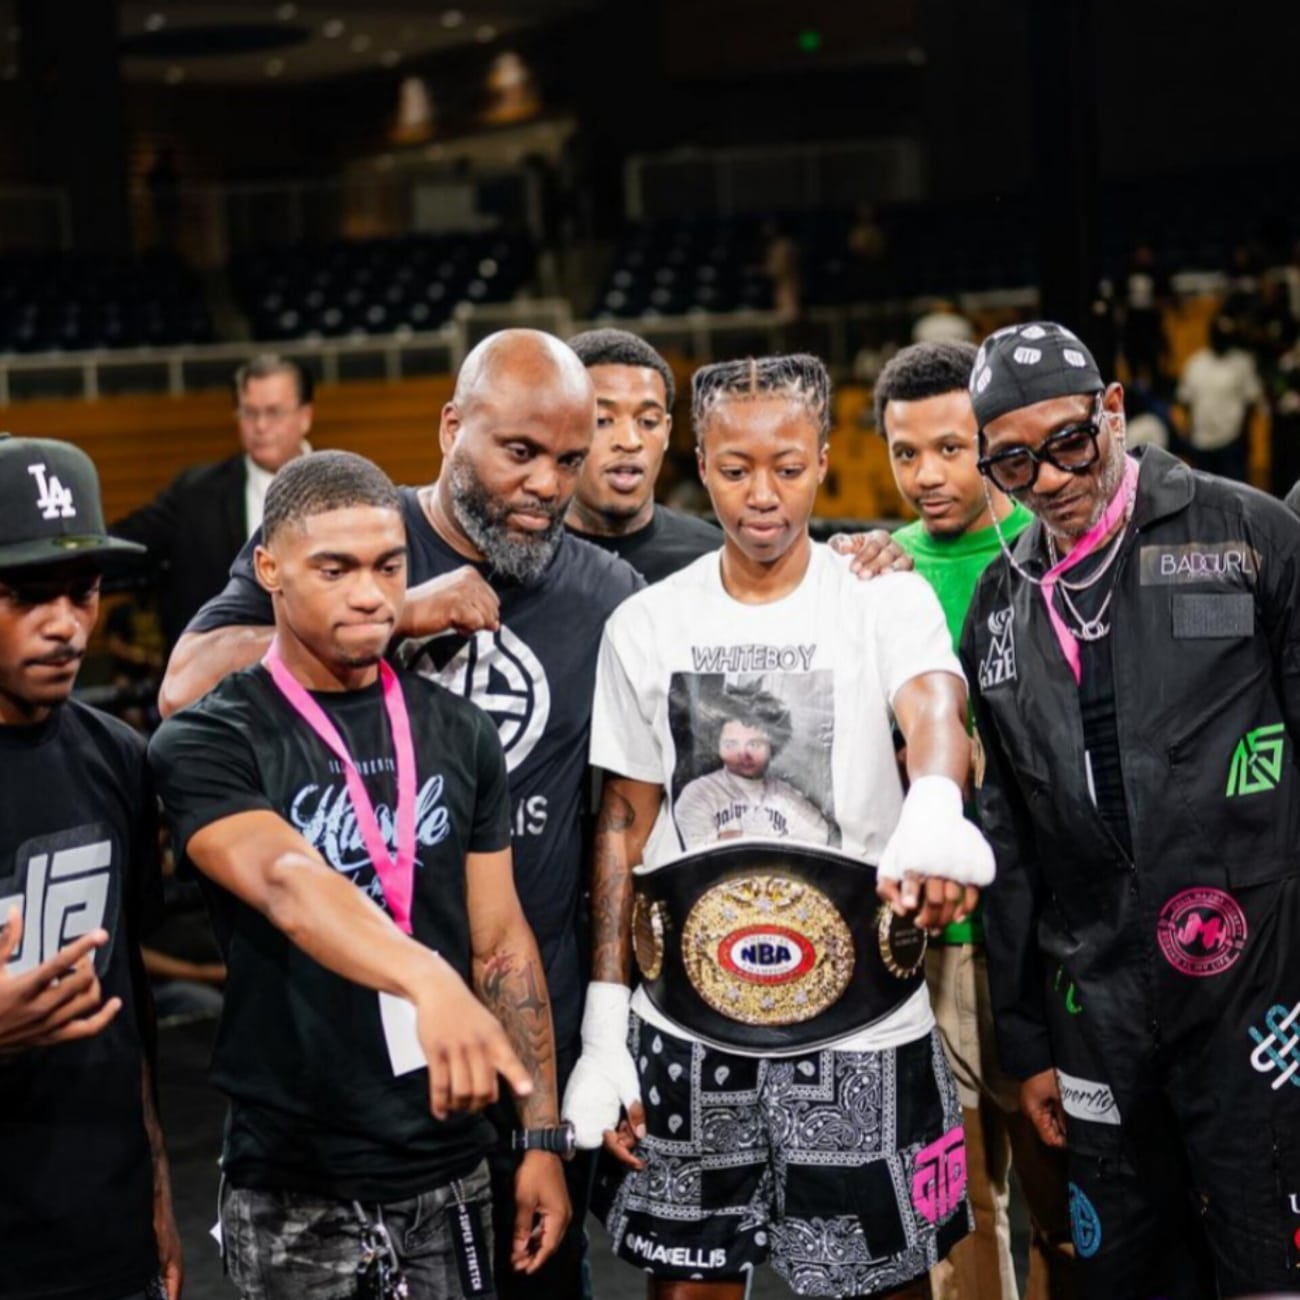 Image: Boxing results: Dominique Crowder And Mia Ellis Both Win Titles At The GTD Challenge